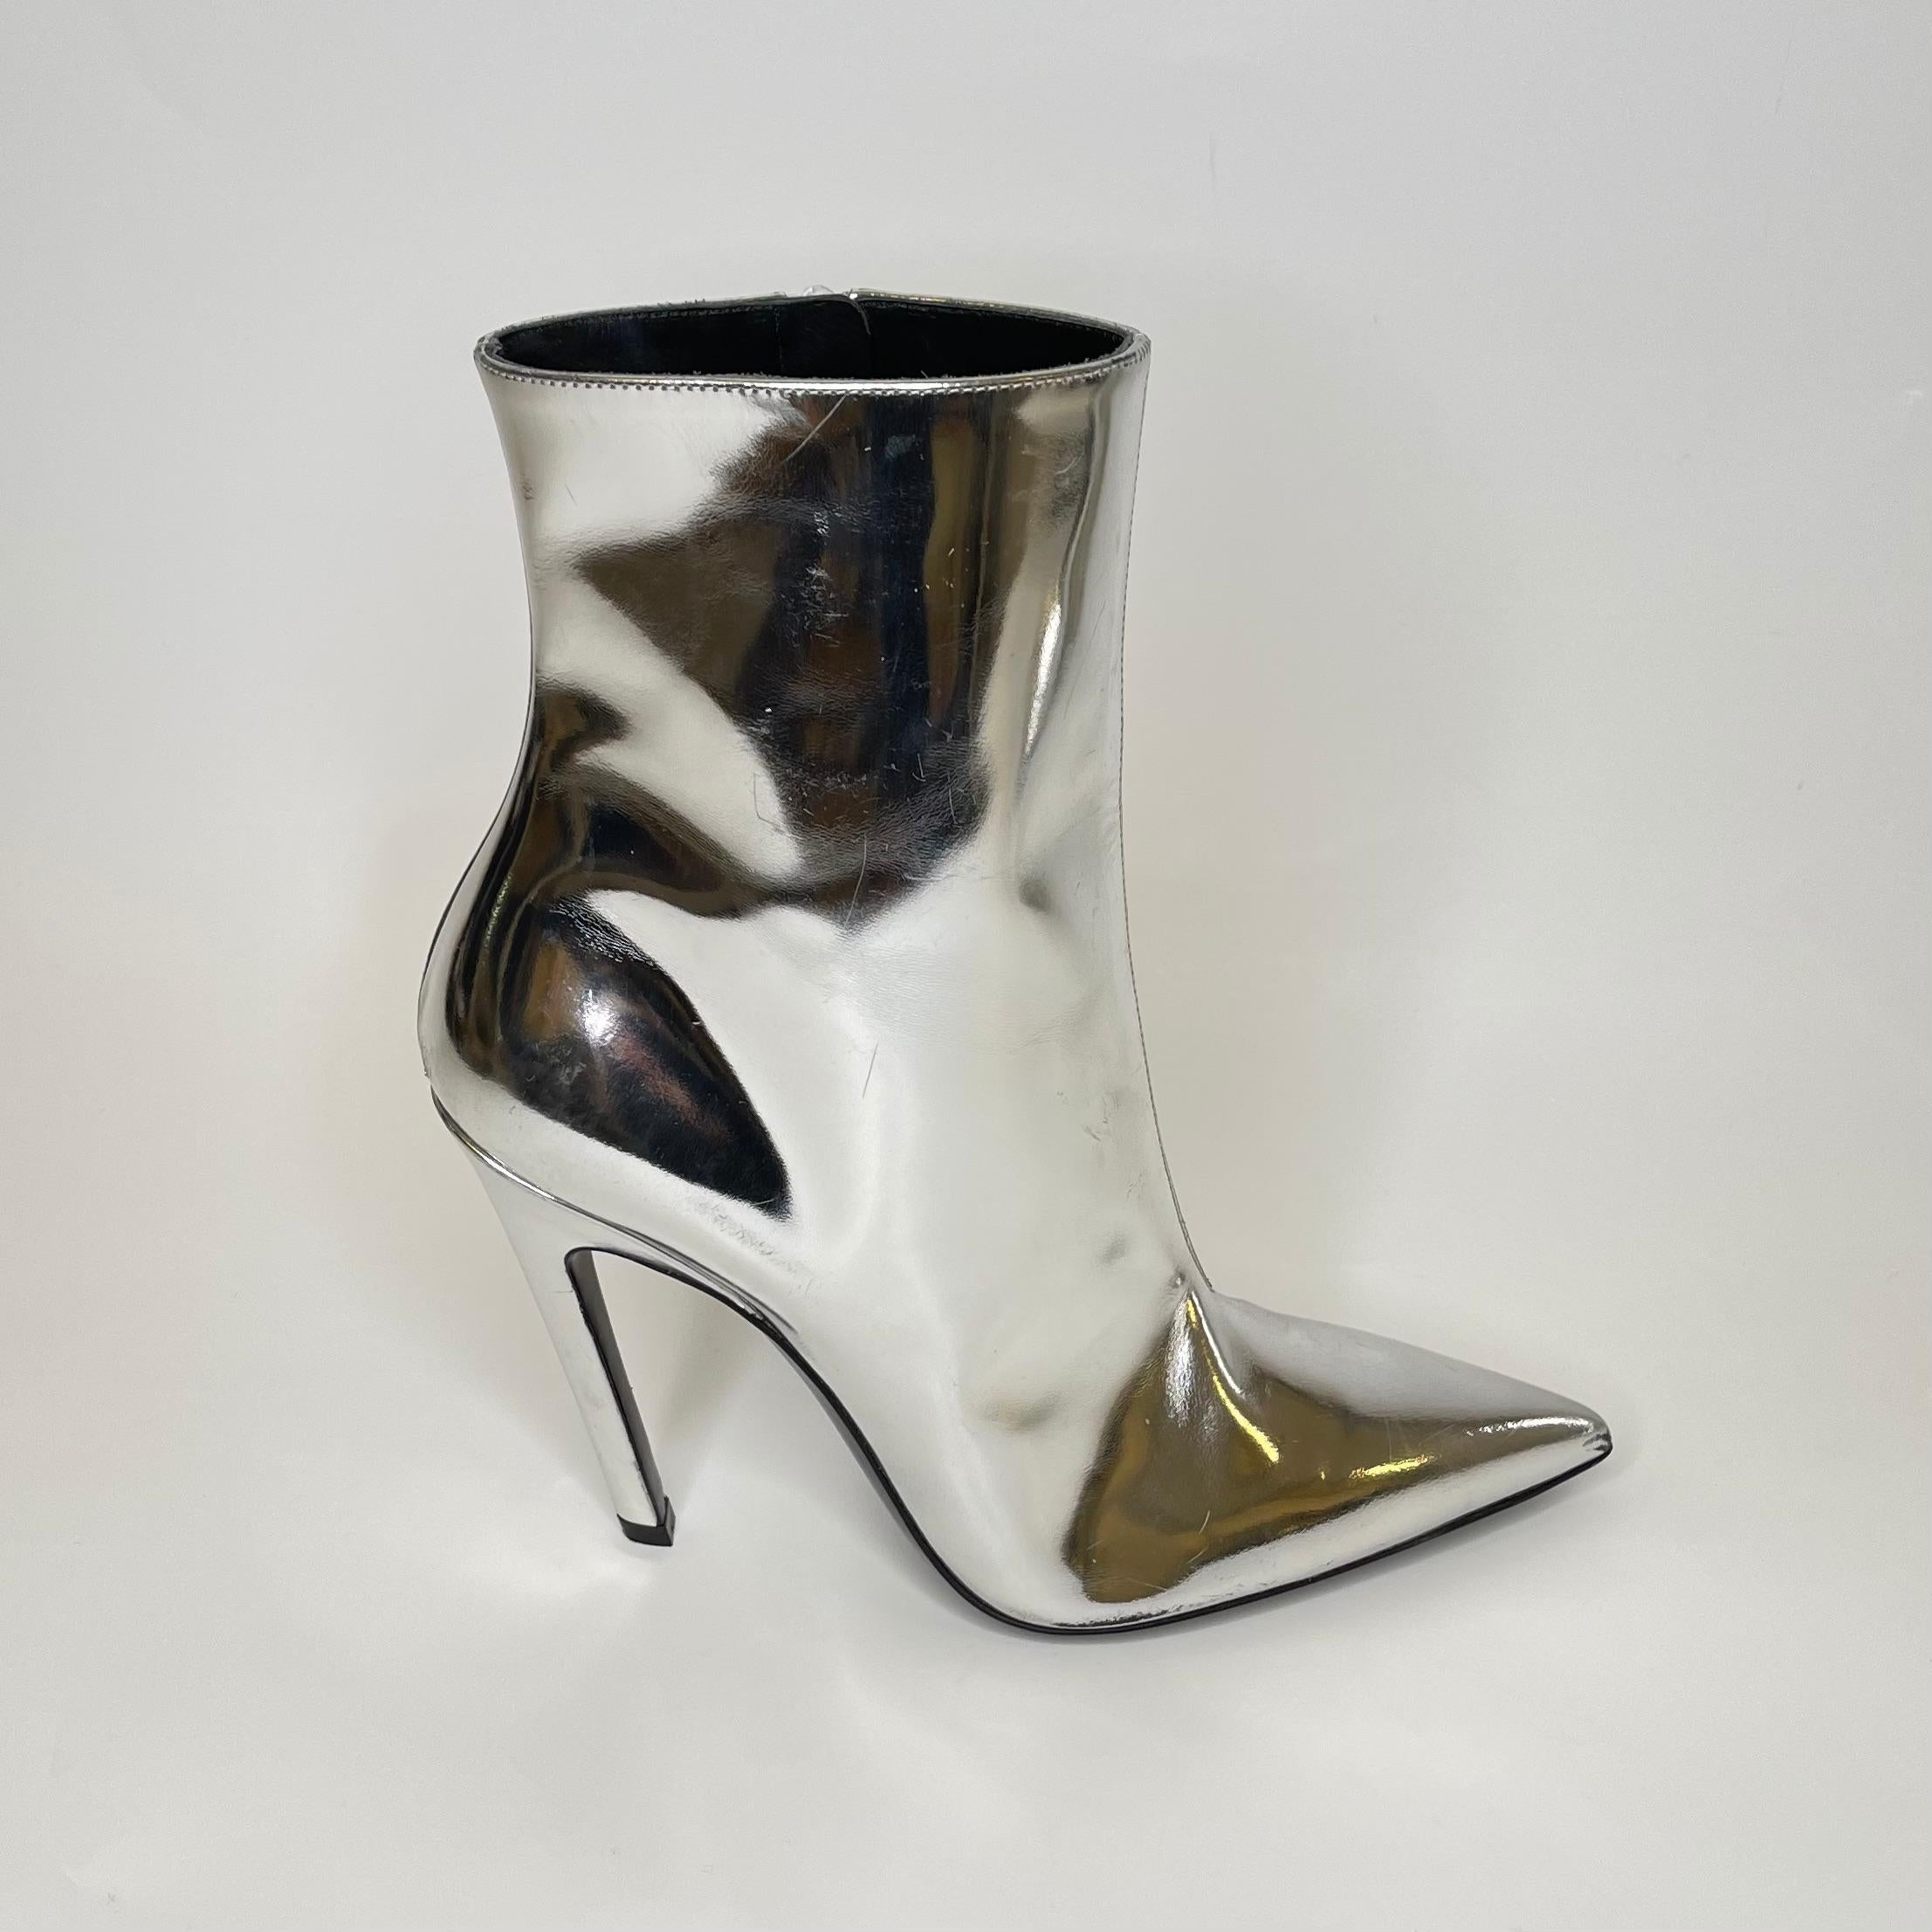 These silver Balenciaga mirror ankle boots are made with leather and feature side zip fastening, 80-mm heel, a pointed toe and a mirrored shine effect.

COLOR: Mirrored (sliver)
MATERIAL: Leather
ITEM CODE: 482095
SIZE: 40 EU / 9 US
HEEL HEIGHT: 80